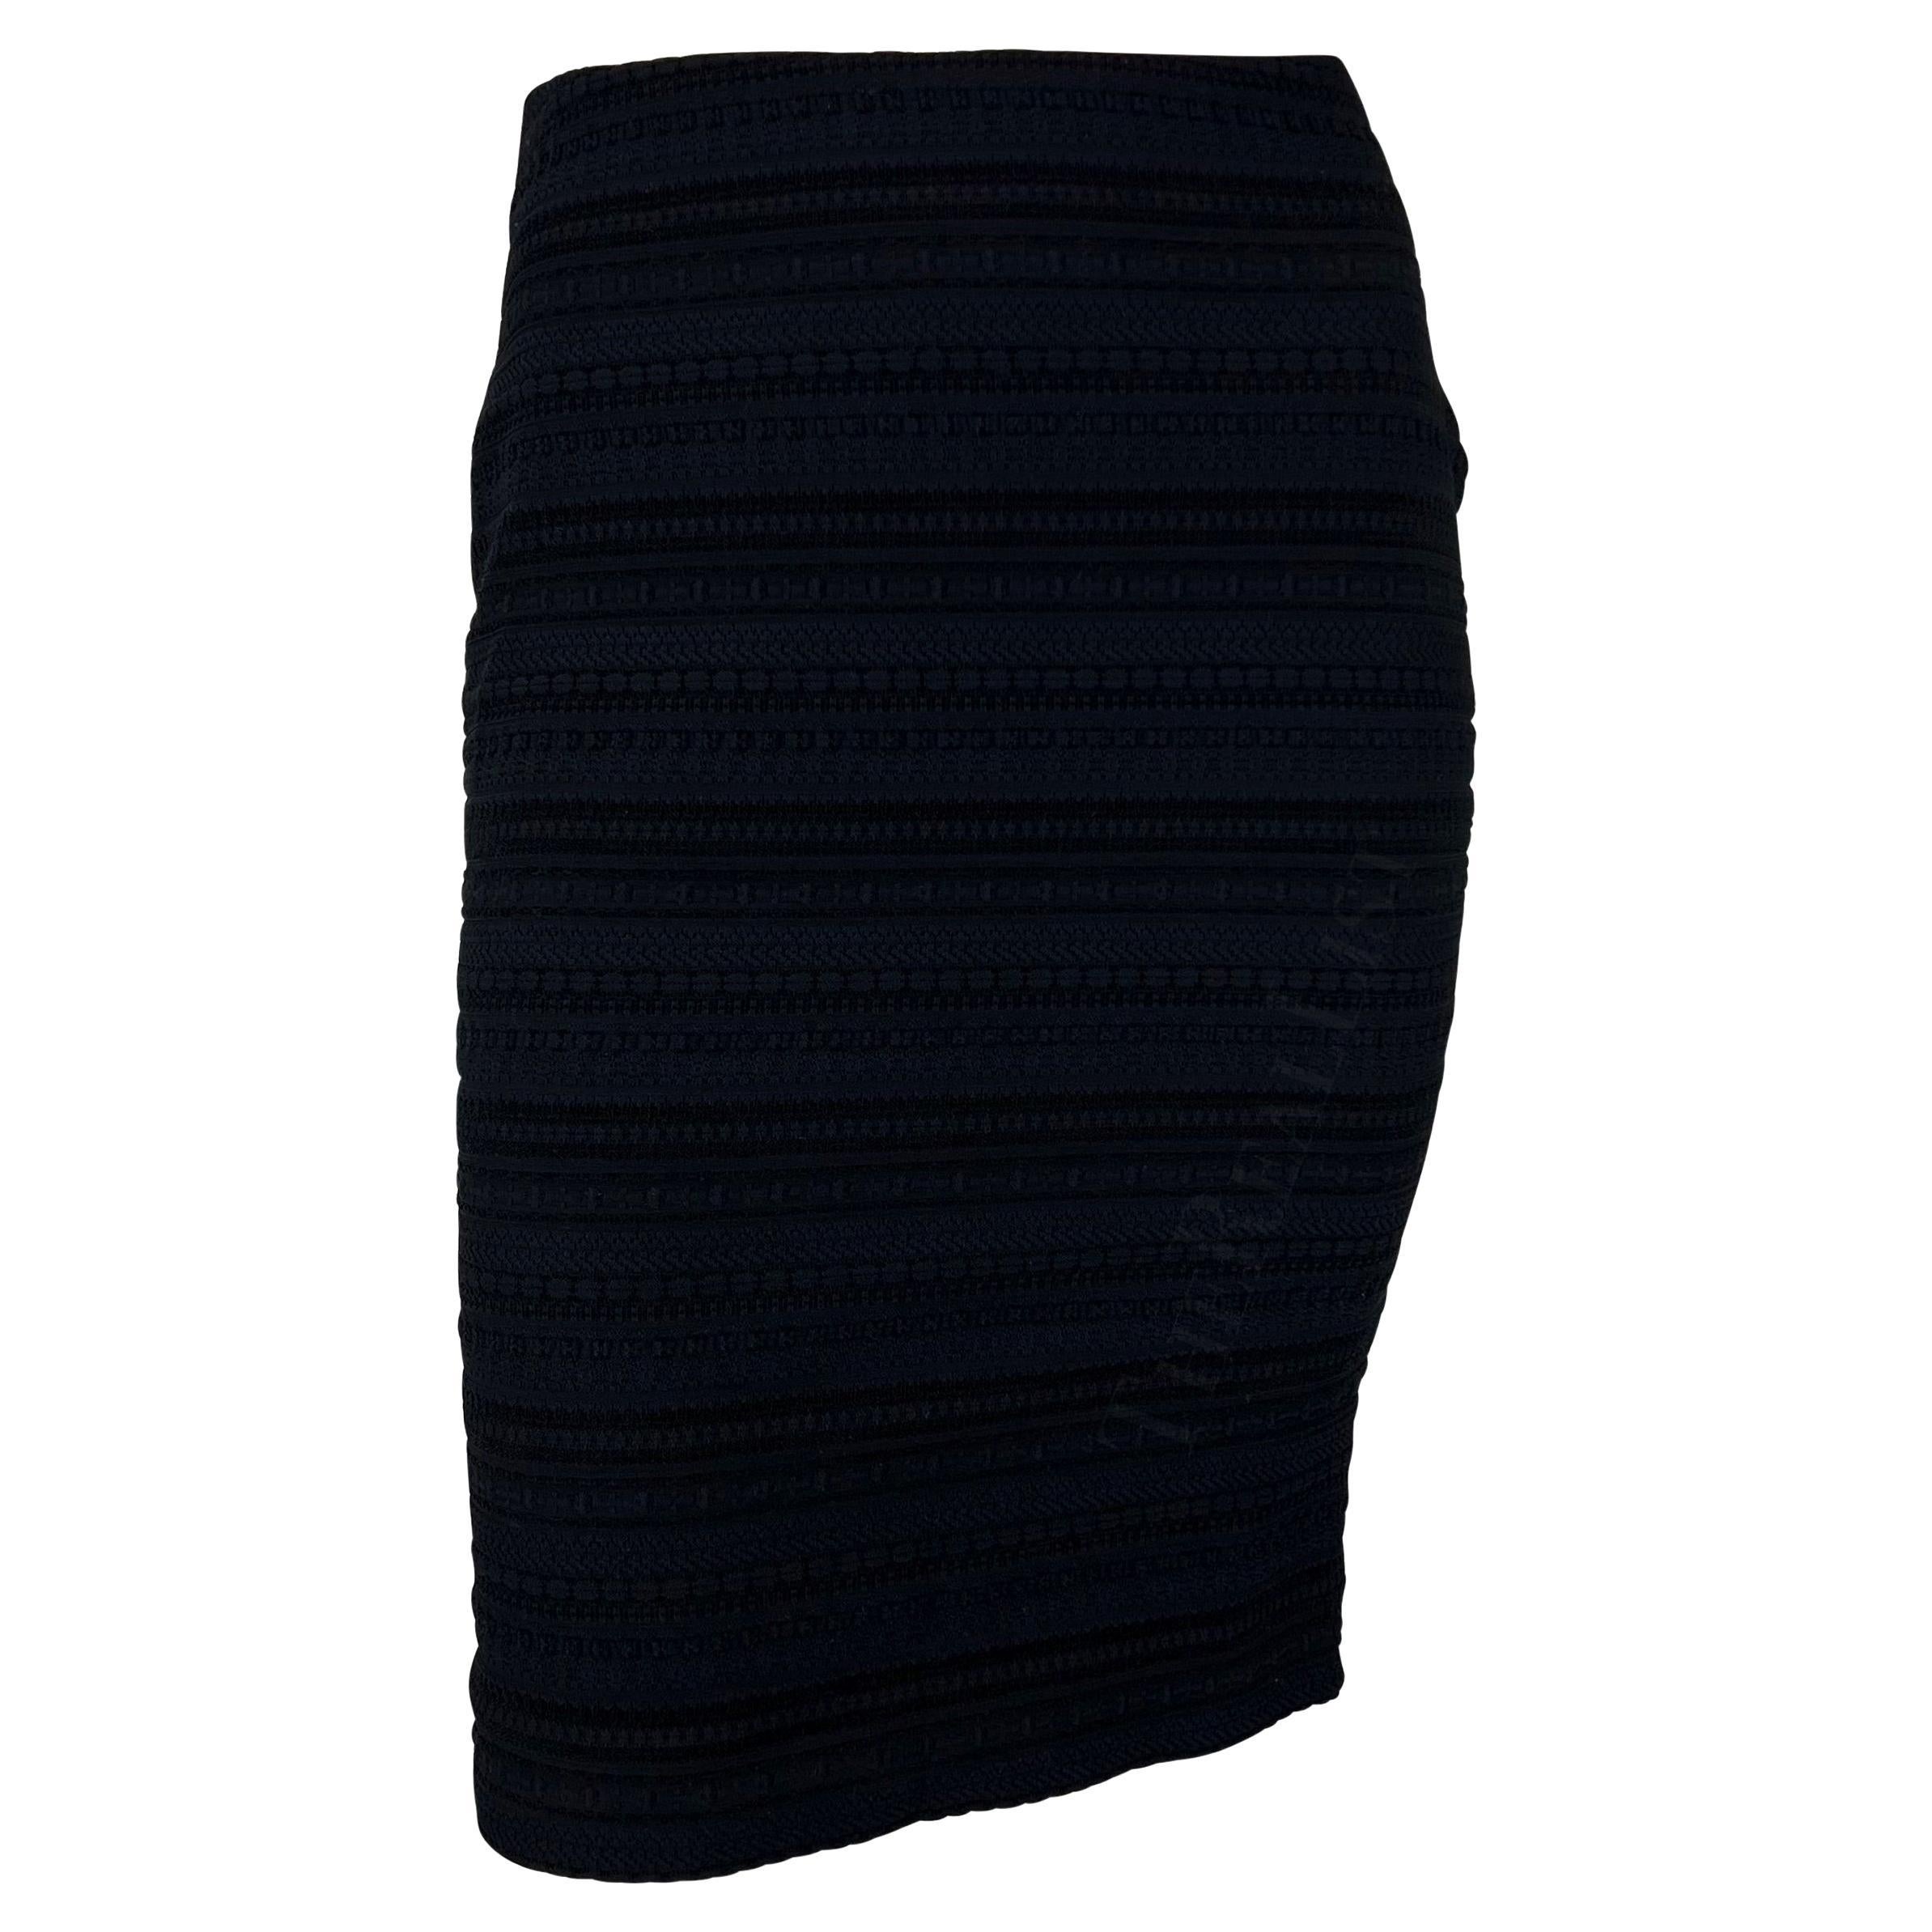 Late 1990s Dolce & Gabbana Black Textured Knit Woven Bodycon Pencil Skirt For Sale